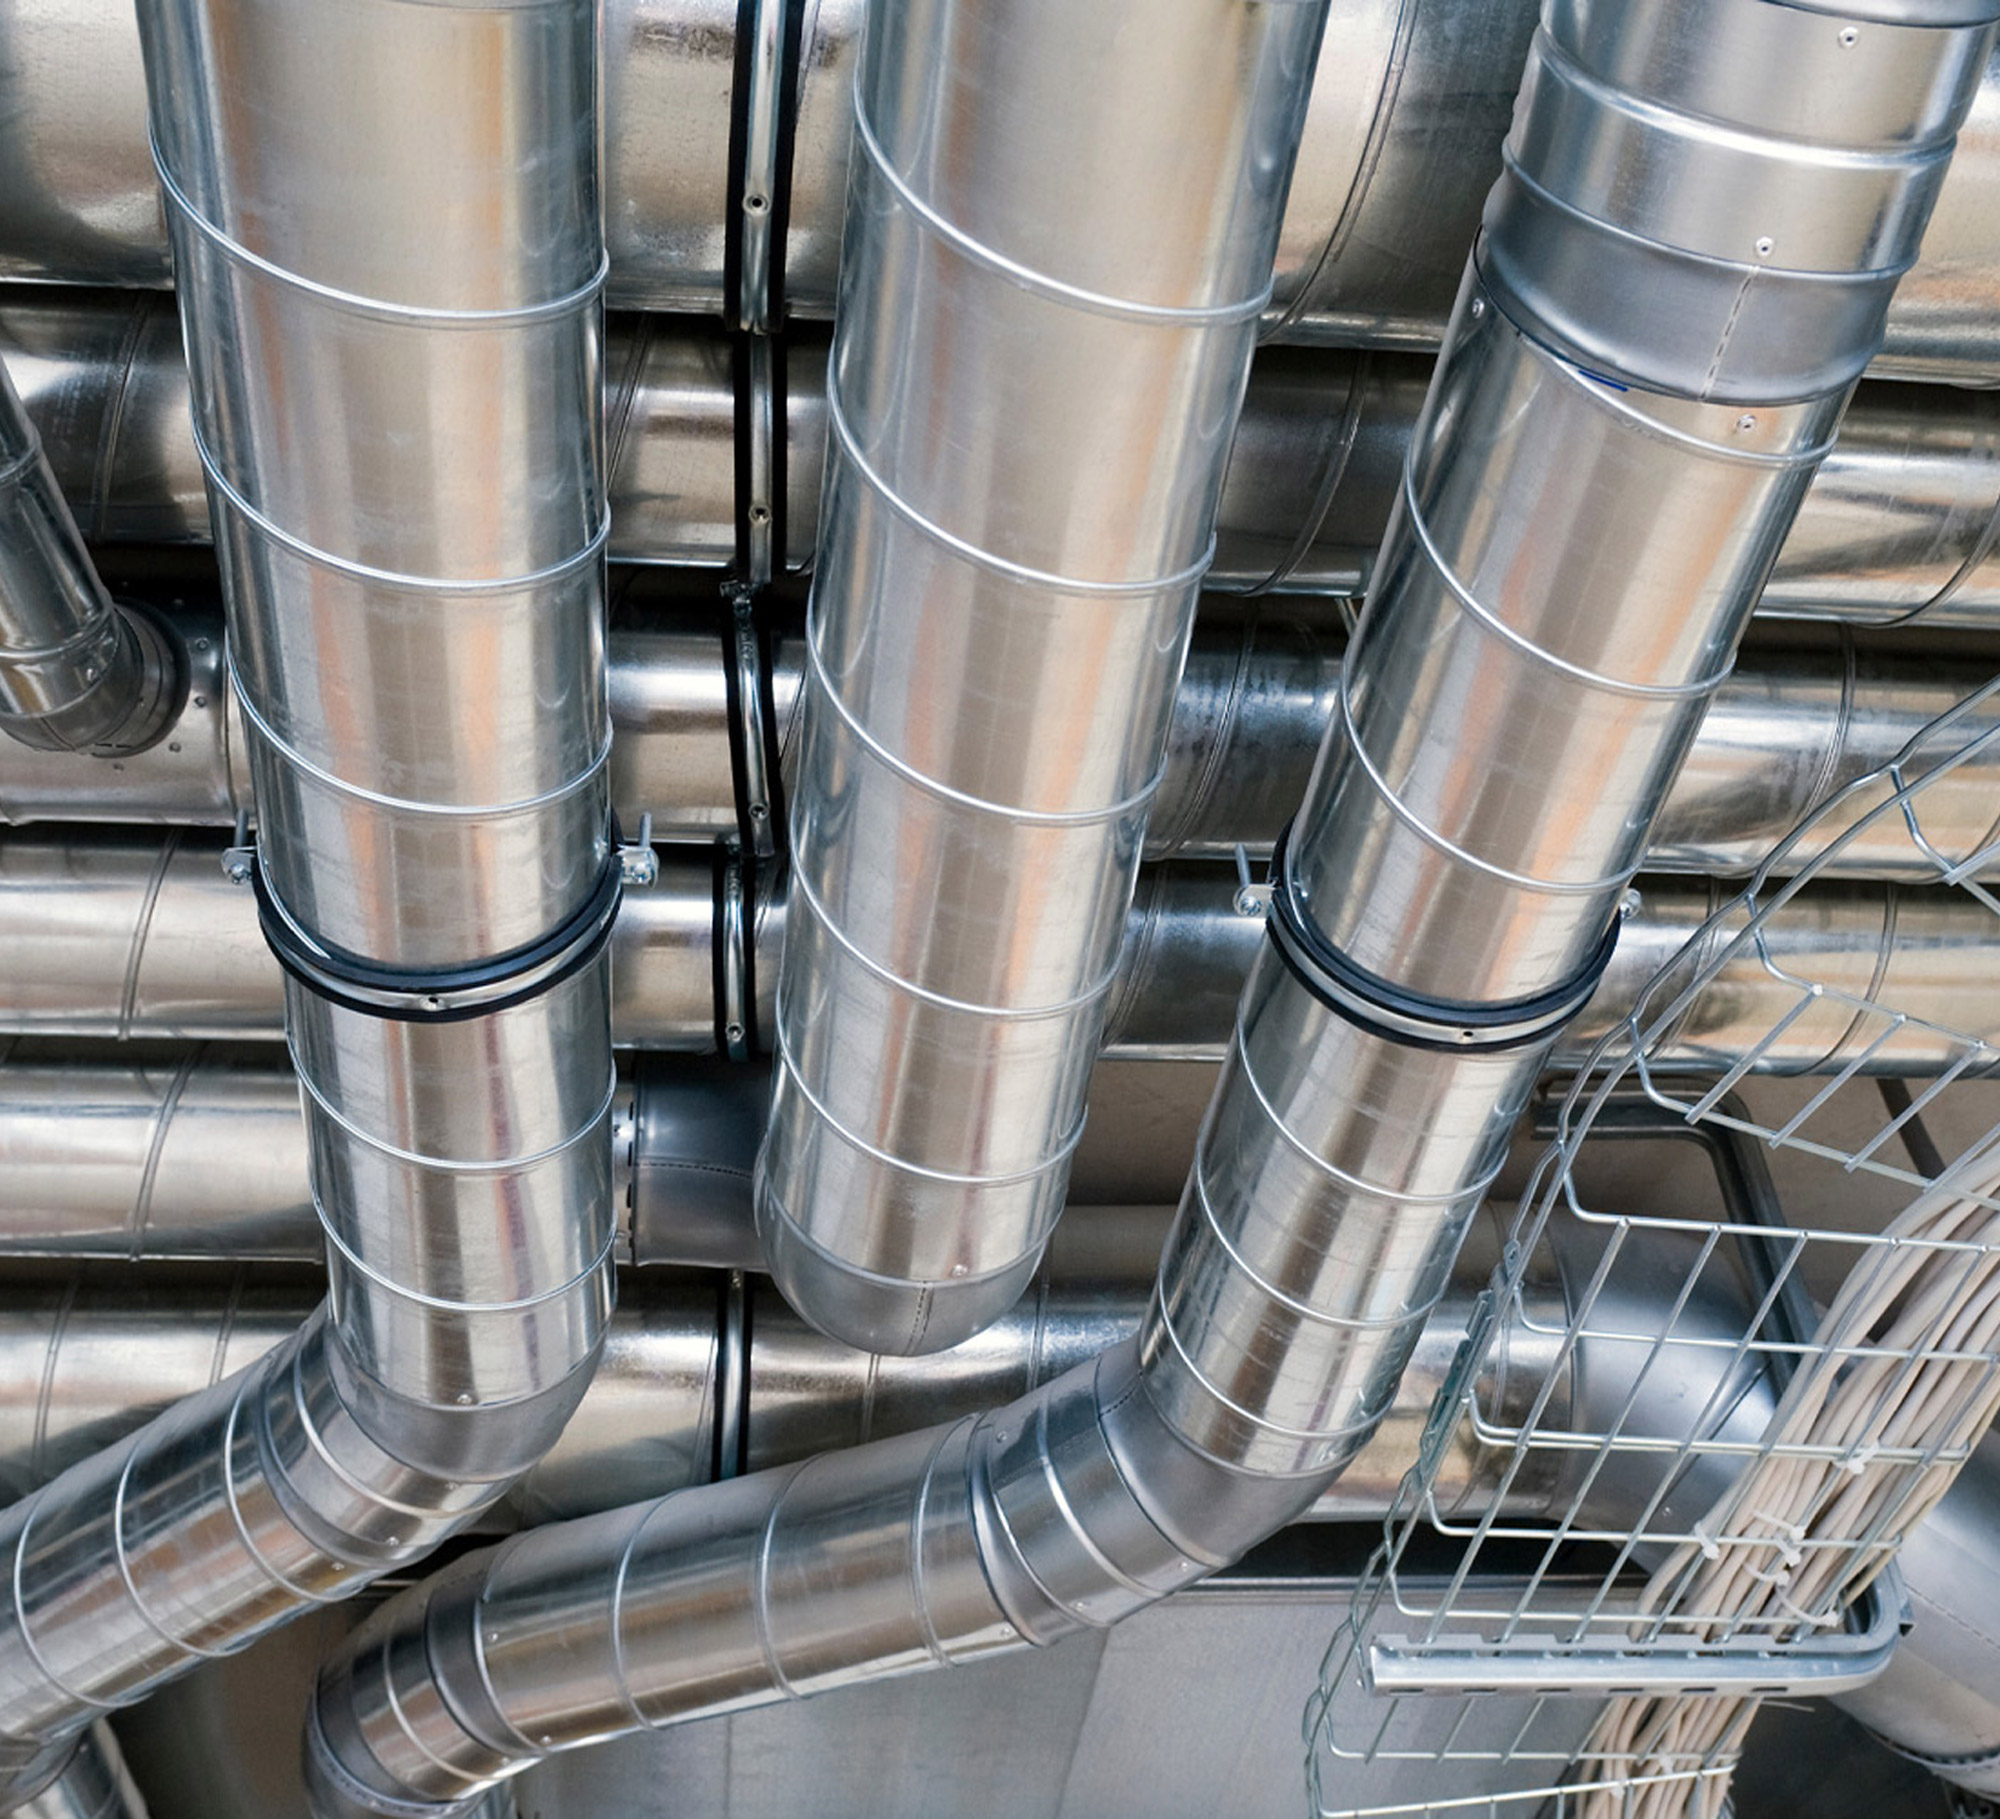 Image of spiral ducting running above head-height.